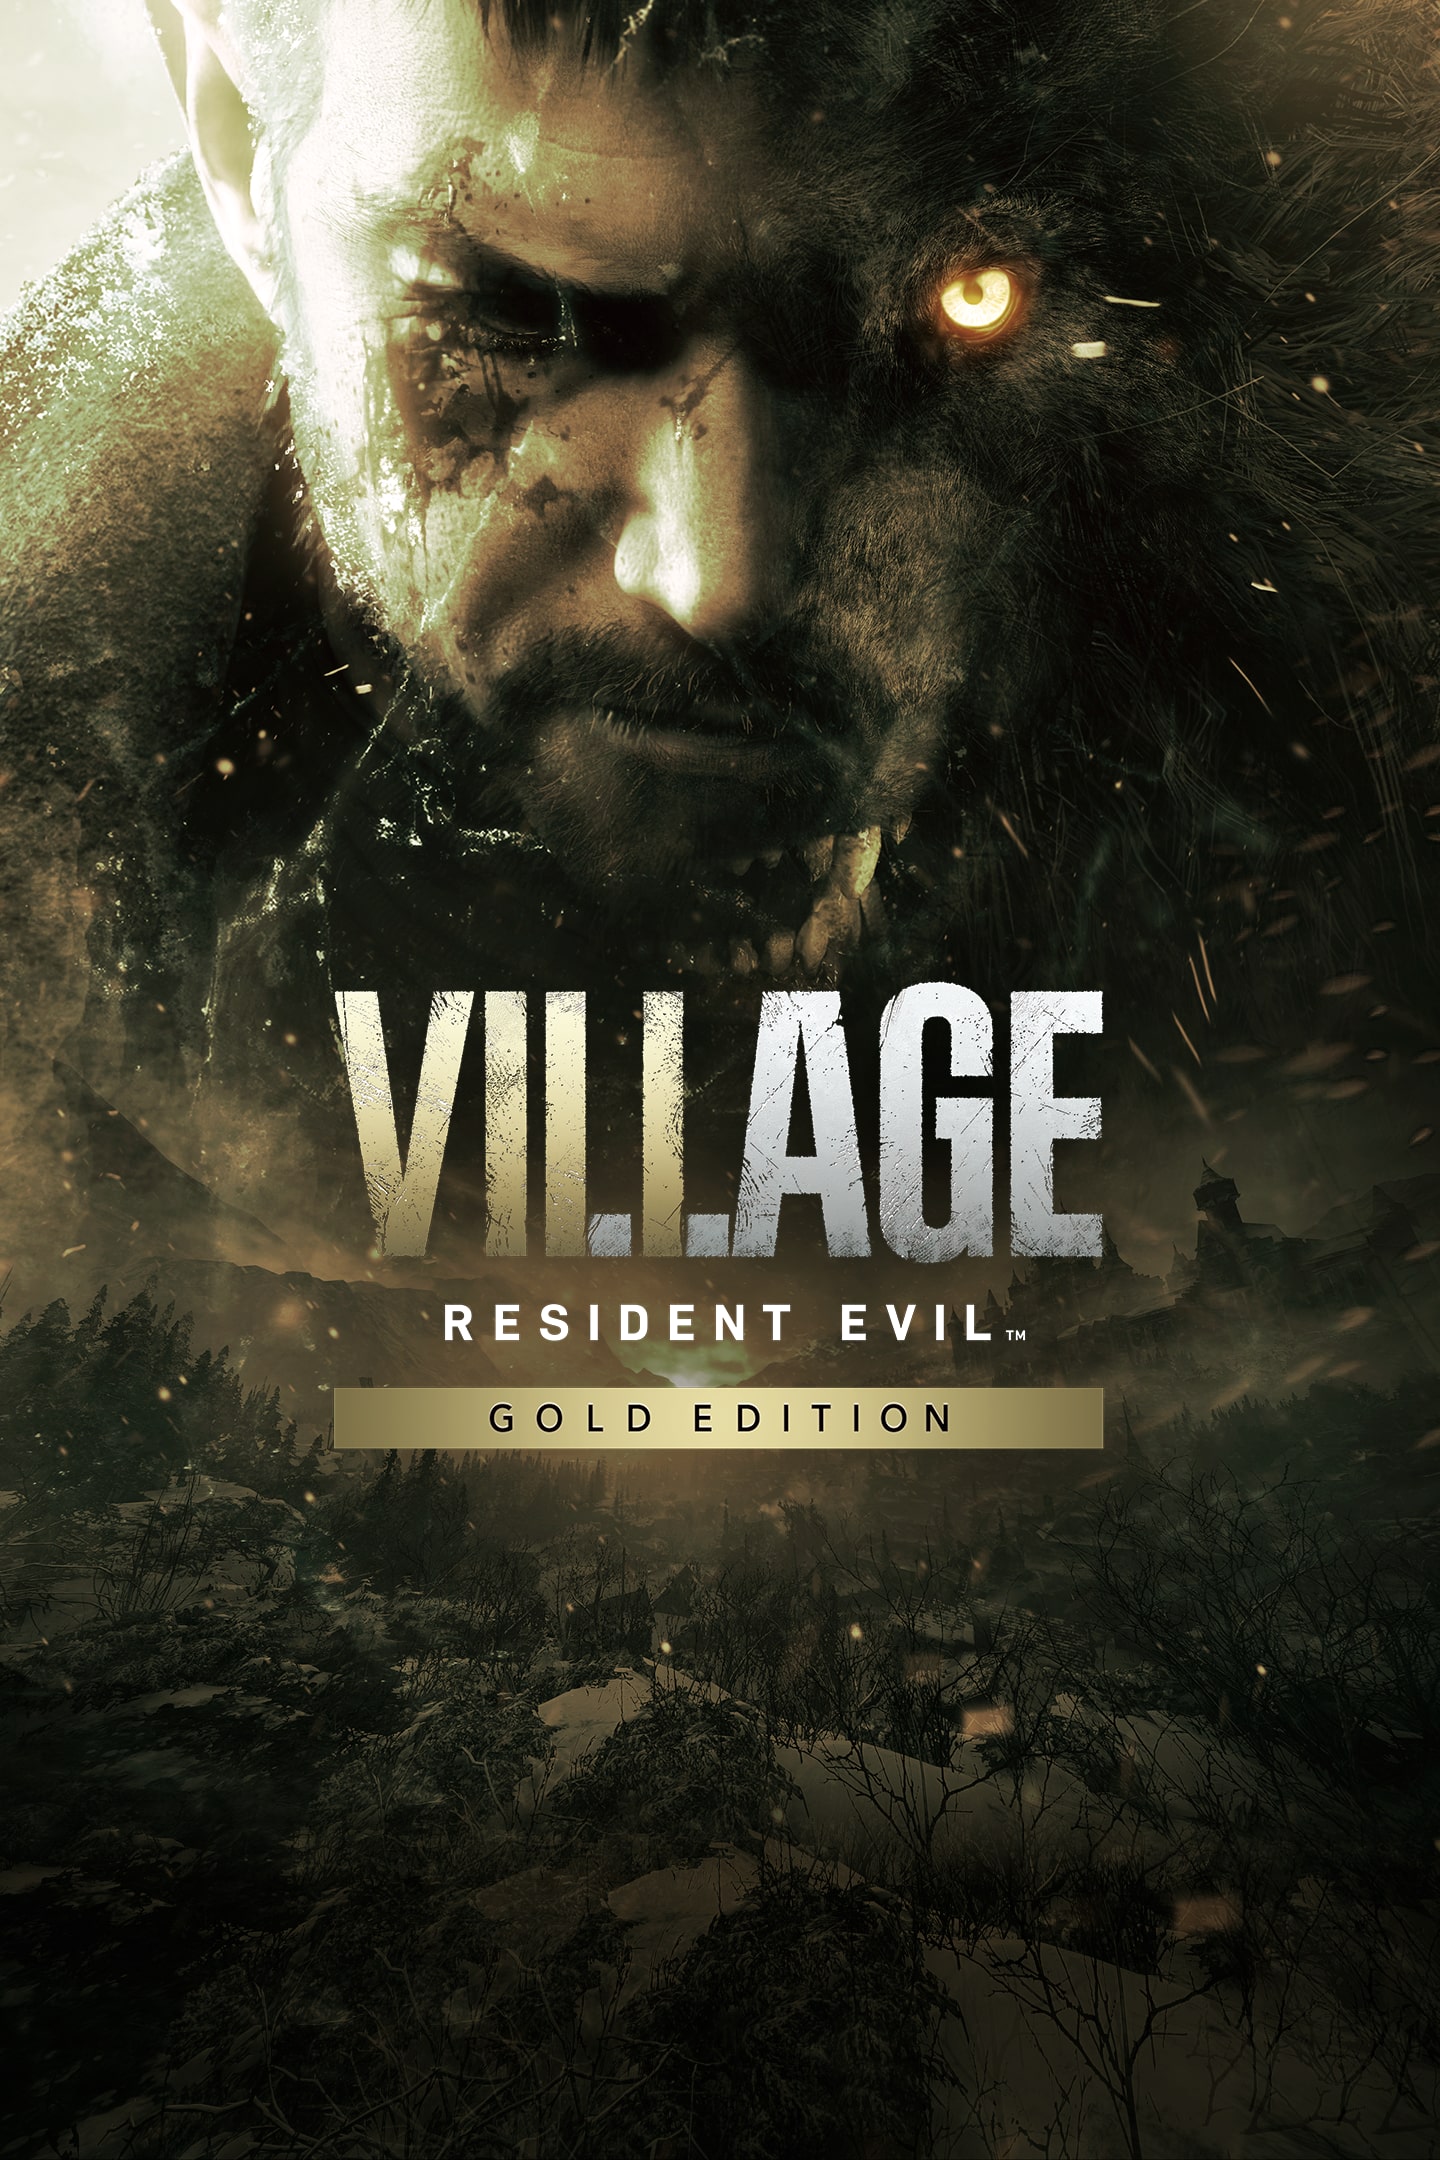 Resident Evil Village is getting free DLC, apparently